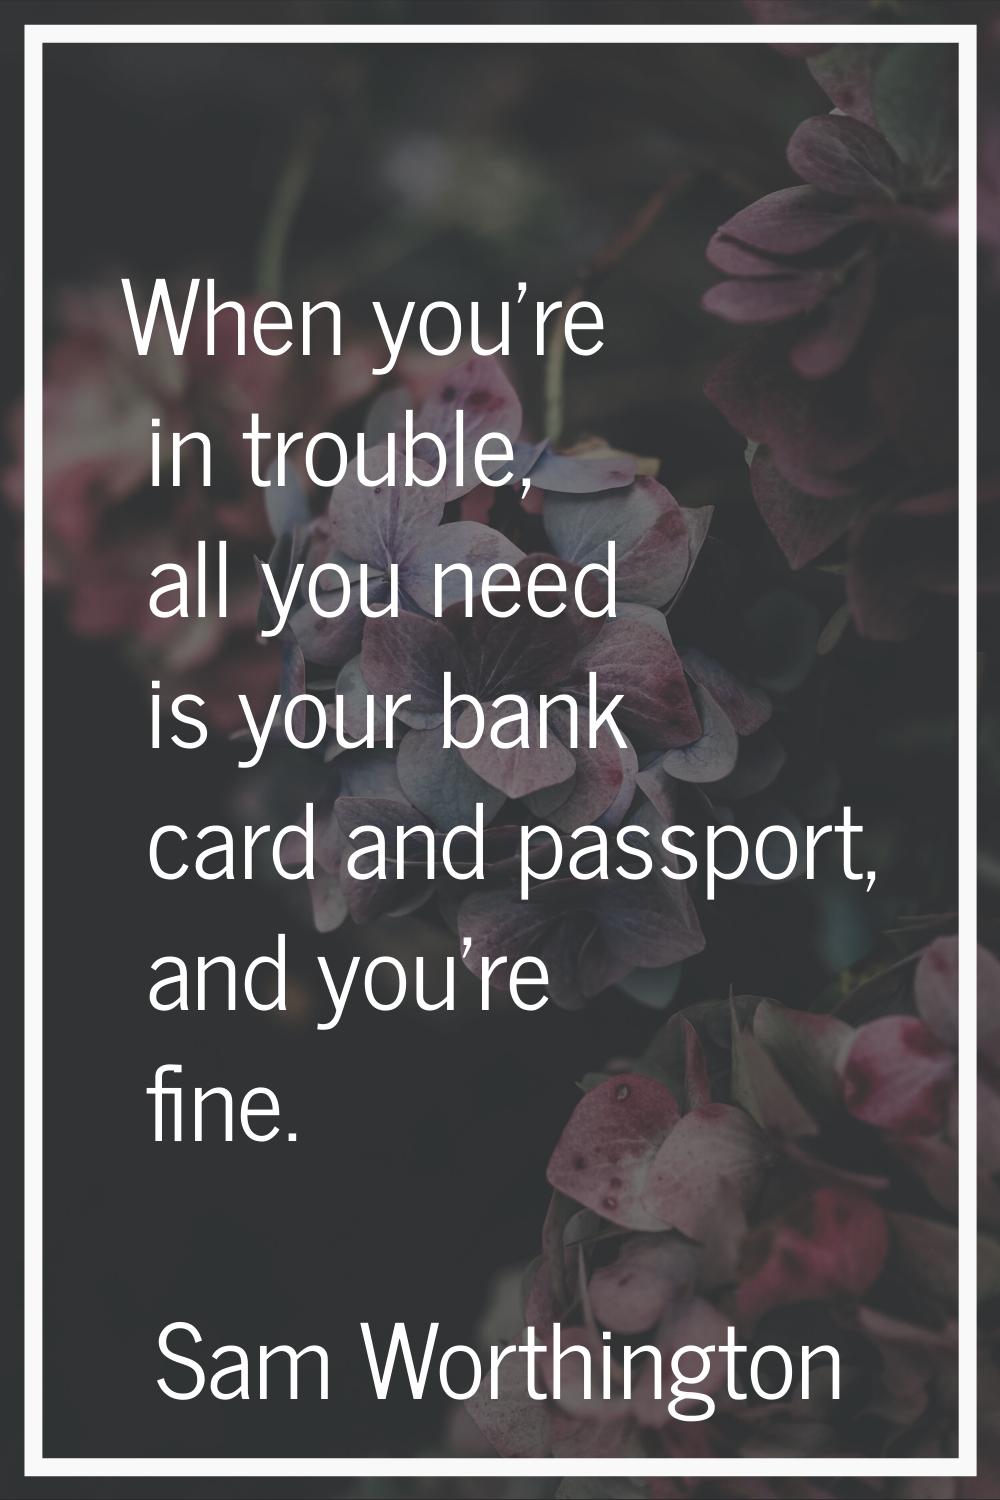 When you're in trouble, all you need is your bank card and passport, and you're fine.